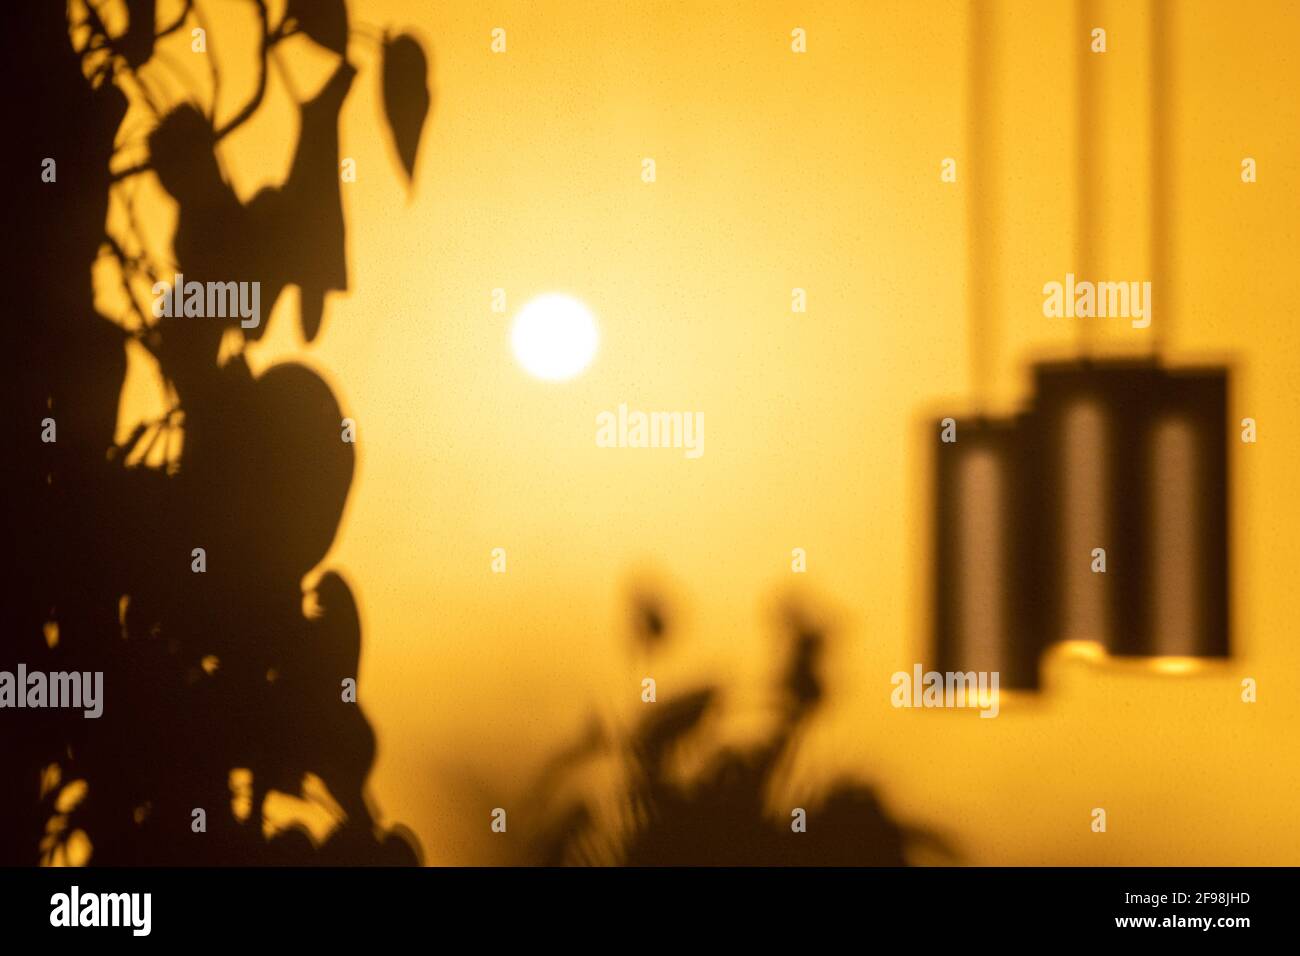 Play of light on a room wall. Stock Photo